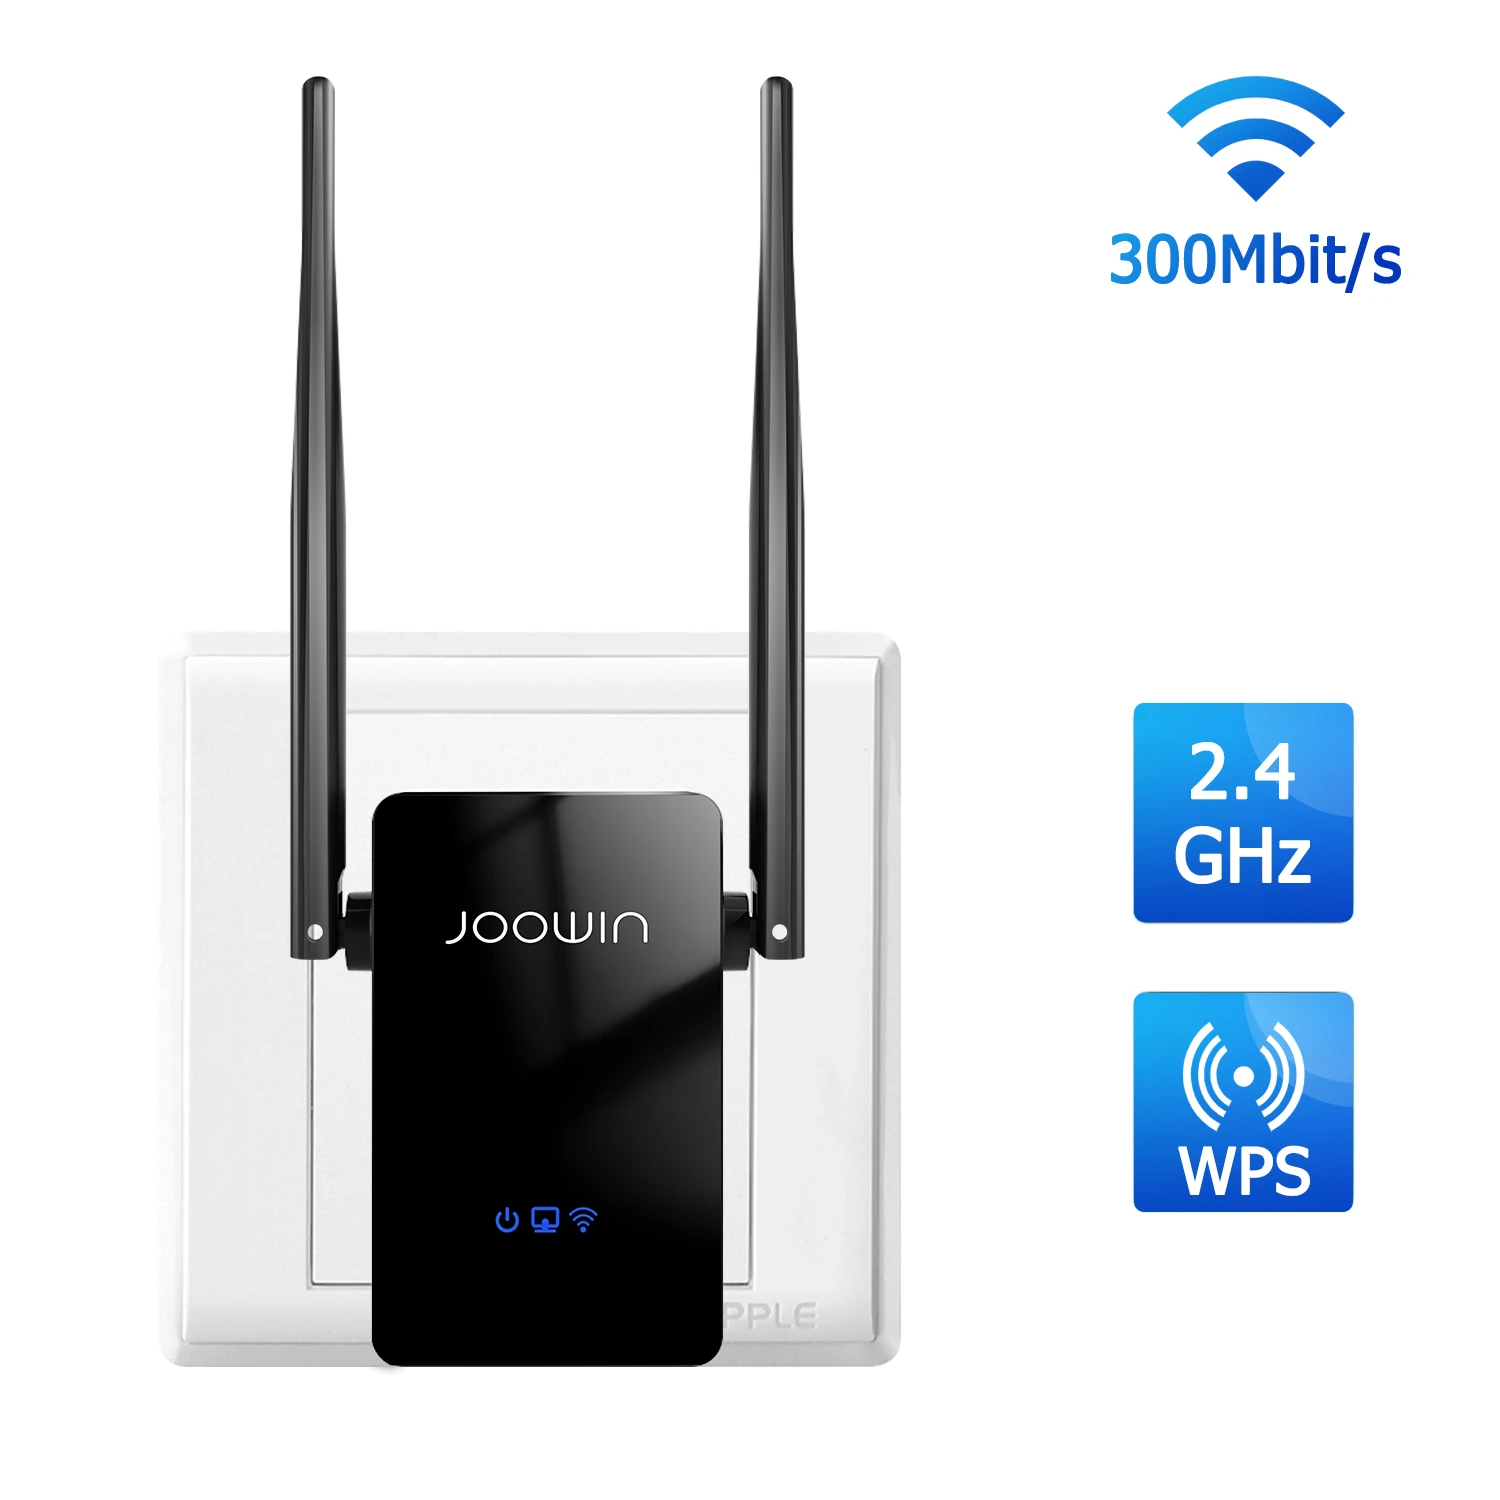 300Mbps Wireless Wifi Repeater AP Router Signal Booster Range Extender EU